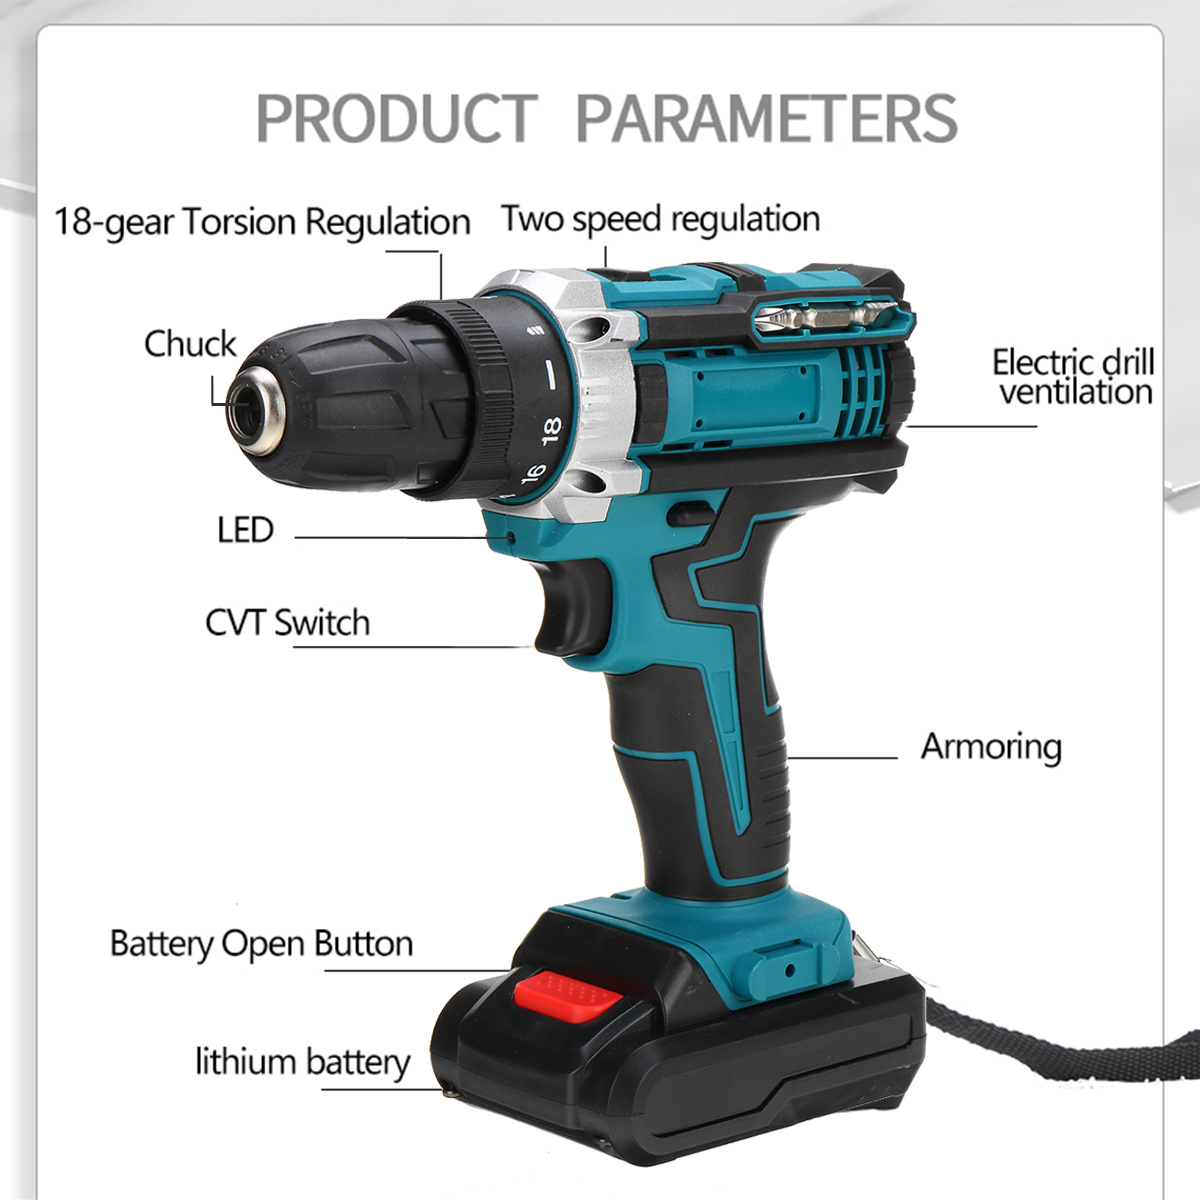 2000rpm-Impact-Drill-Driver-Rechargeable-Electric-Screwdriver-Portable-Wood-Metal-Drilling-Tool-w-1p-1852108-7